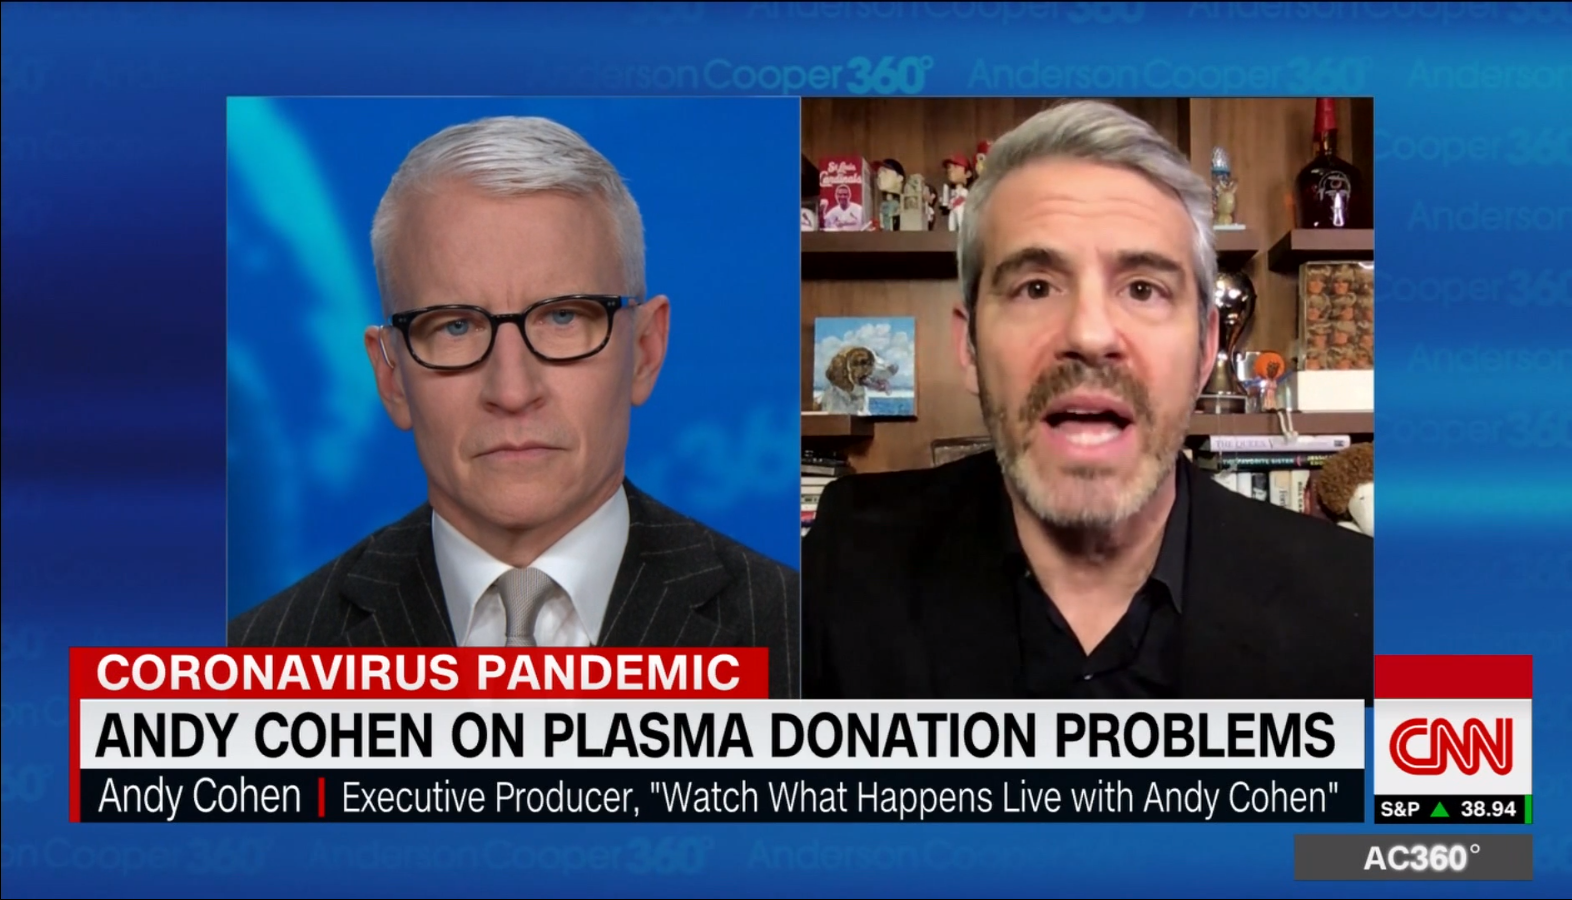 In an interview with Anderson Cooper, Andy Cohen pointed out the hypocrisy of the rules